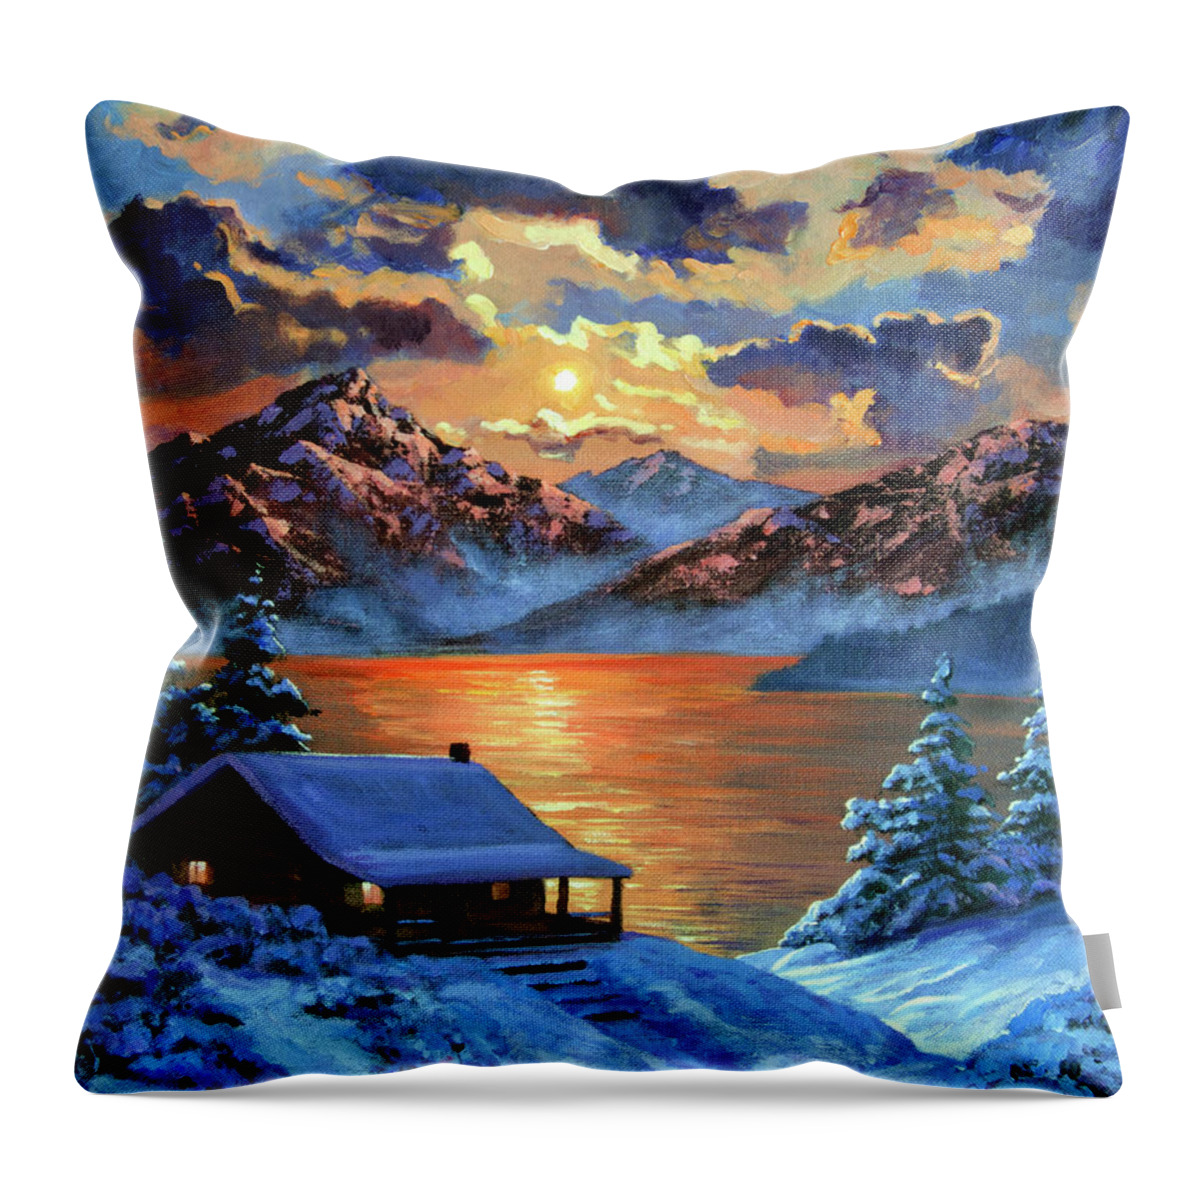 Landscape Throw Pillow featuring the painting The Christmas Morning Cabin by David Lloyd Glover